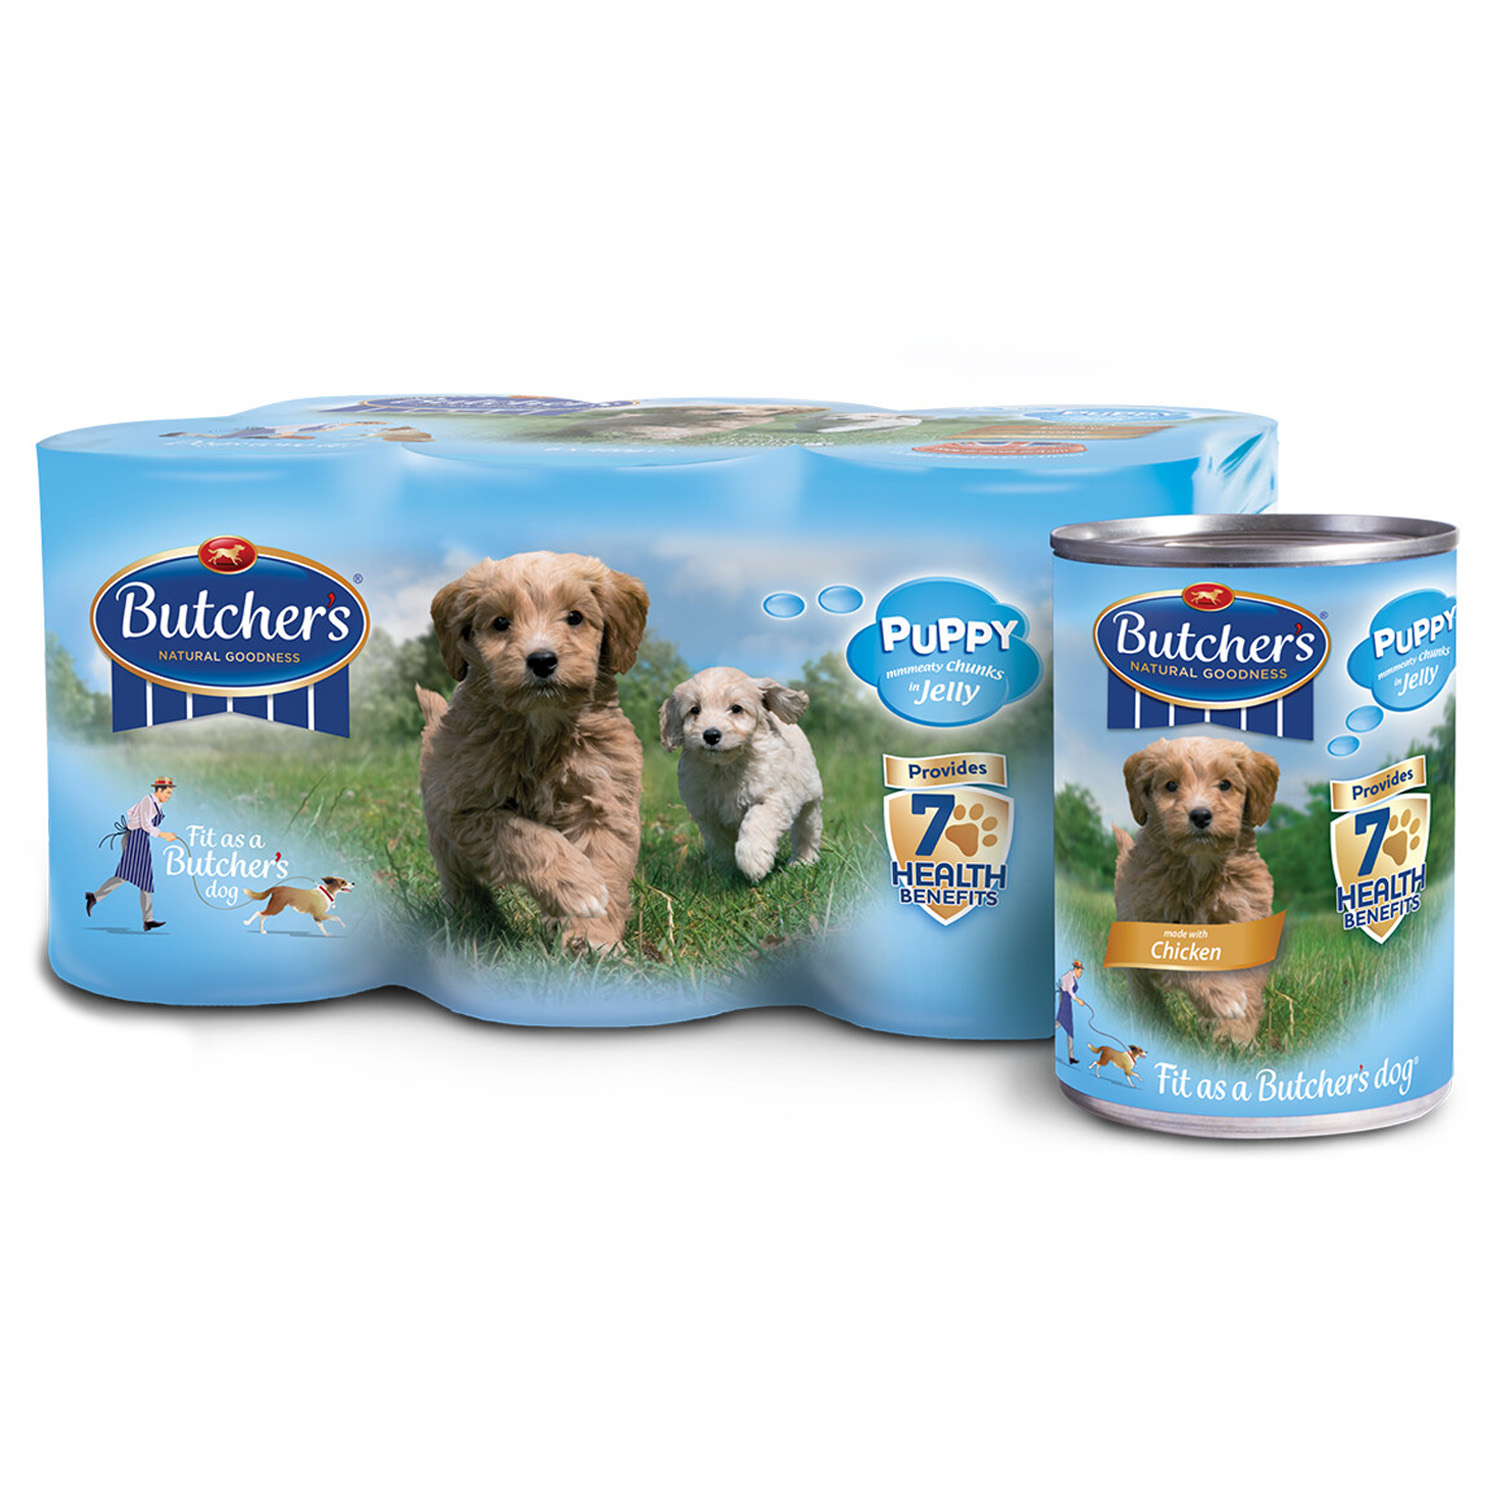 Butchers Natural Goodness Puppy Food Variety 6 Pack Image